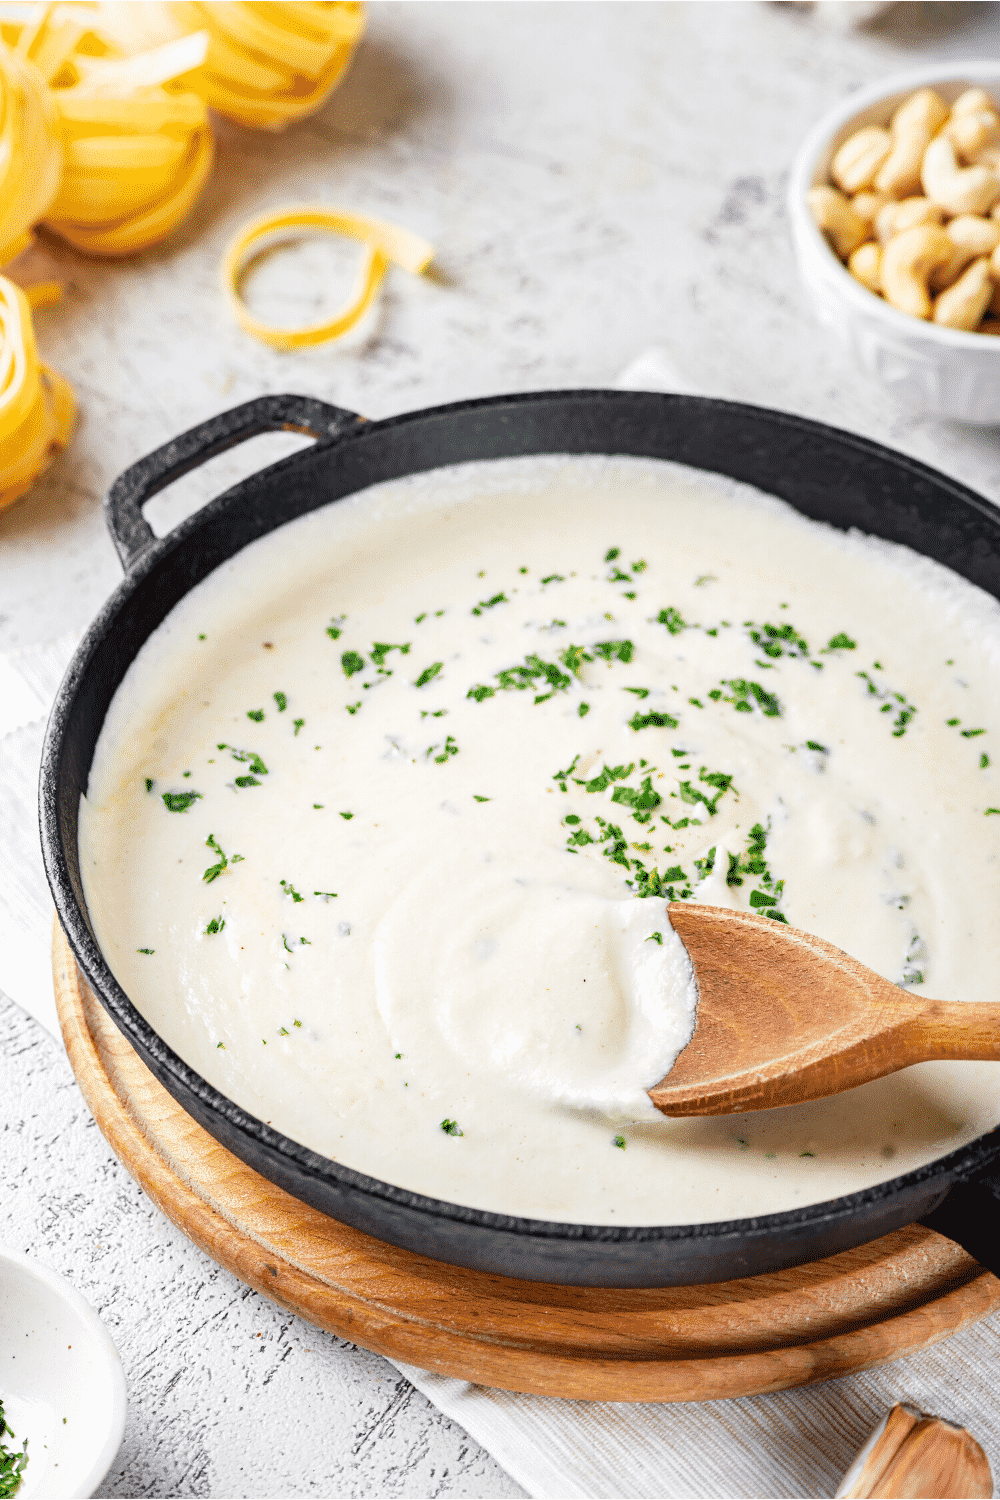 A black pan filled with dairy free Alfredo sauce. There is a wooden spoon in the Alfredo sauce with sauce covering half of the surface of the spoon.